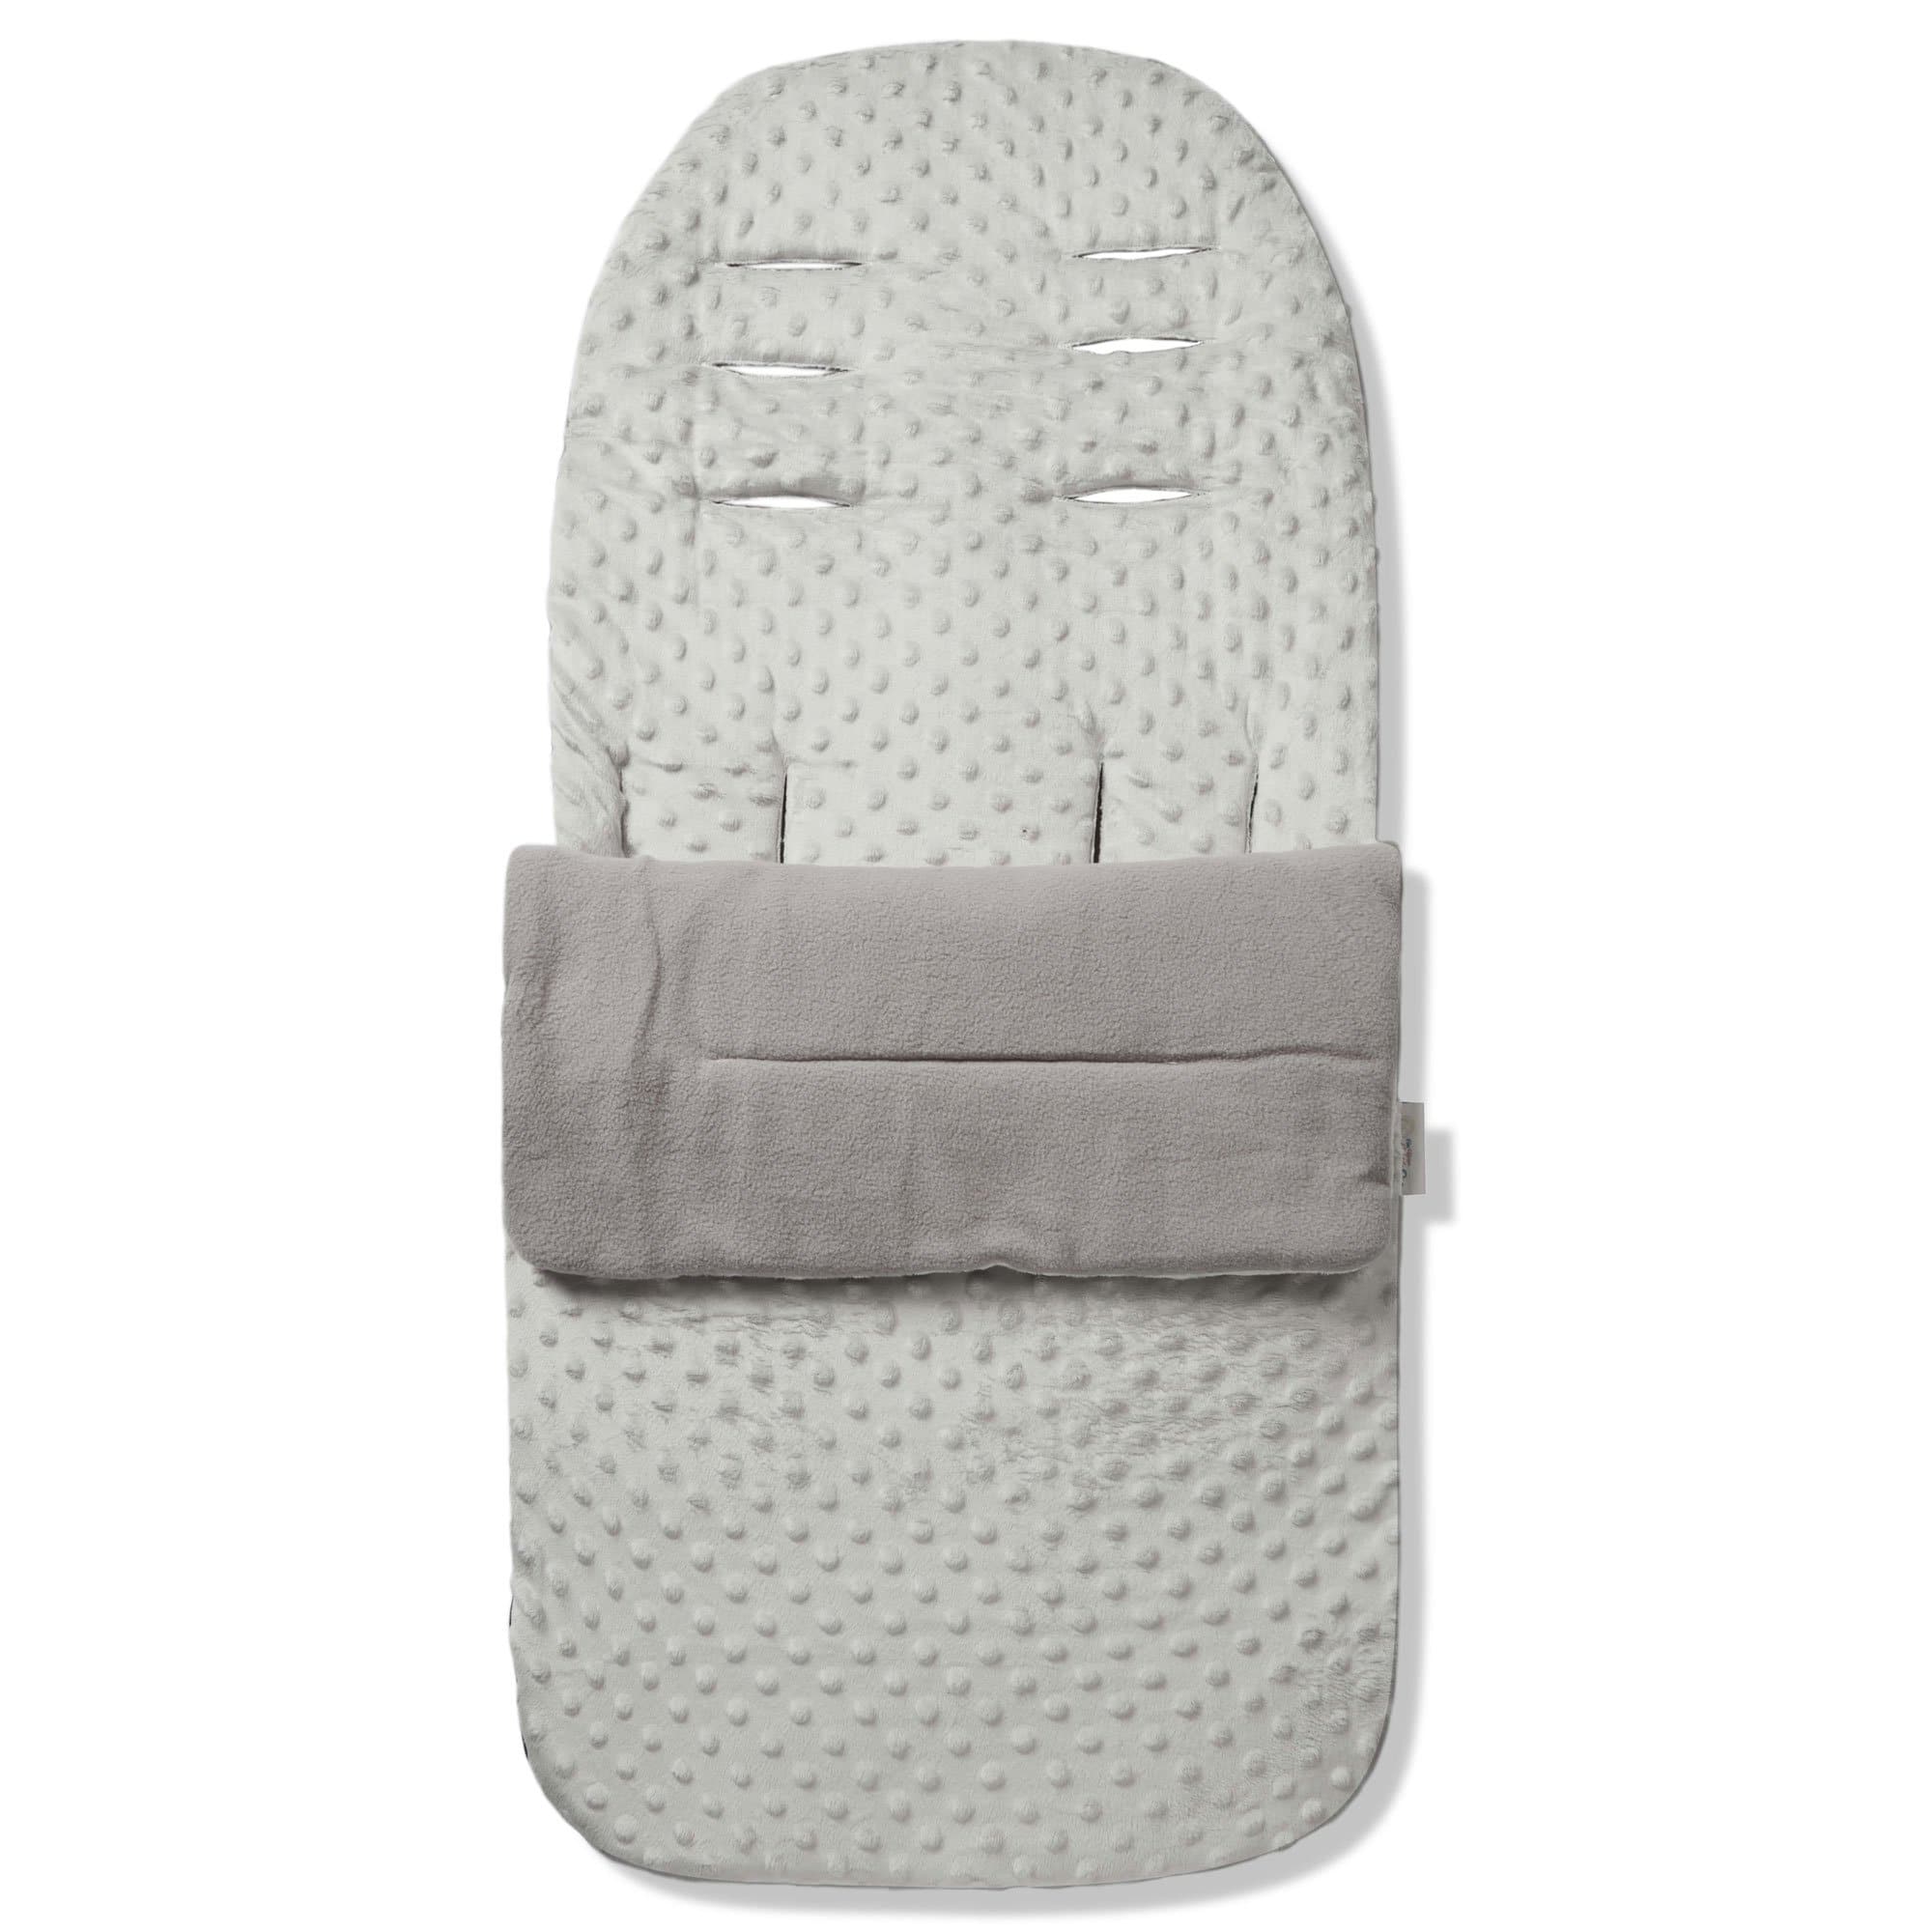 Dimple Footmuff / Cosy Toes Compatible with Little Shield - Grey / Fits All Models | For Your Little One